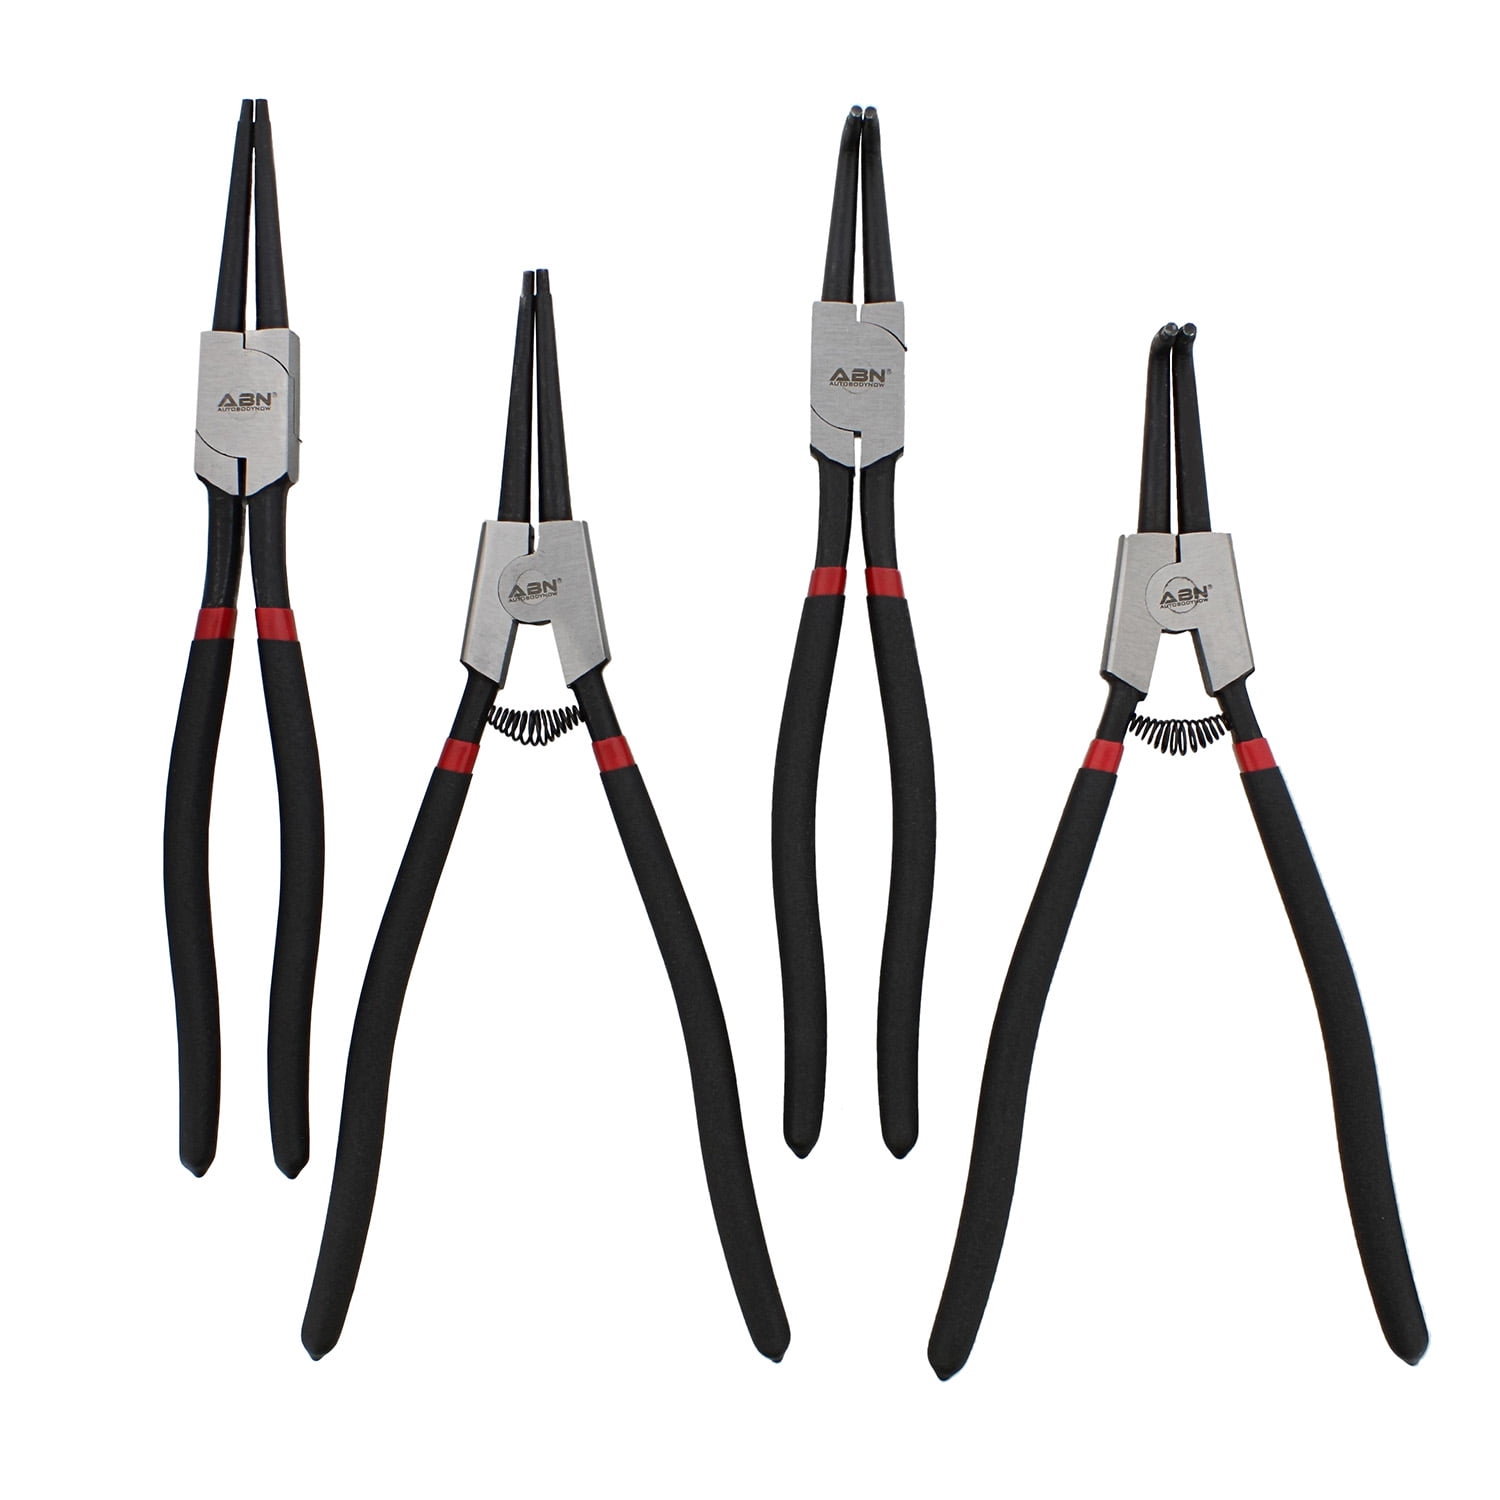 ABN Extra Long Snap Ring Pliers Set - 4pc Lock Ring Pliers with